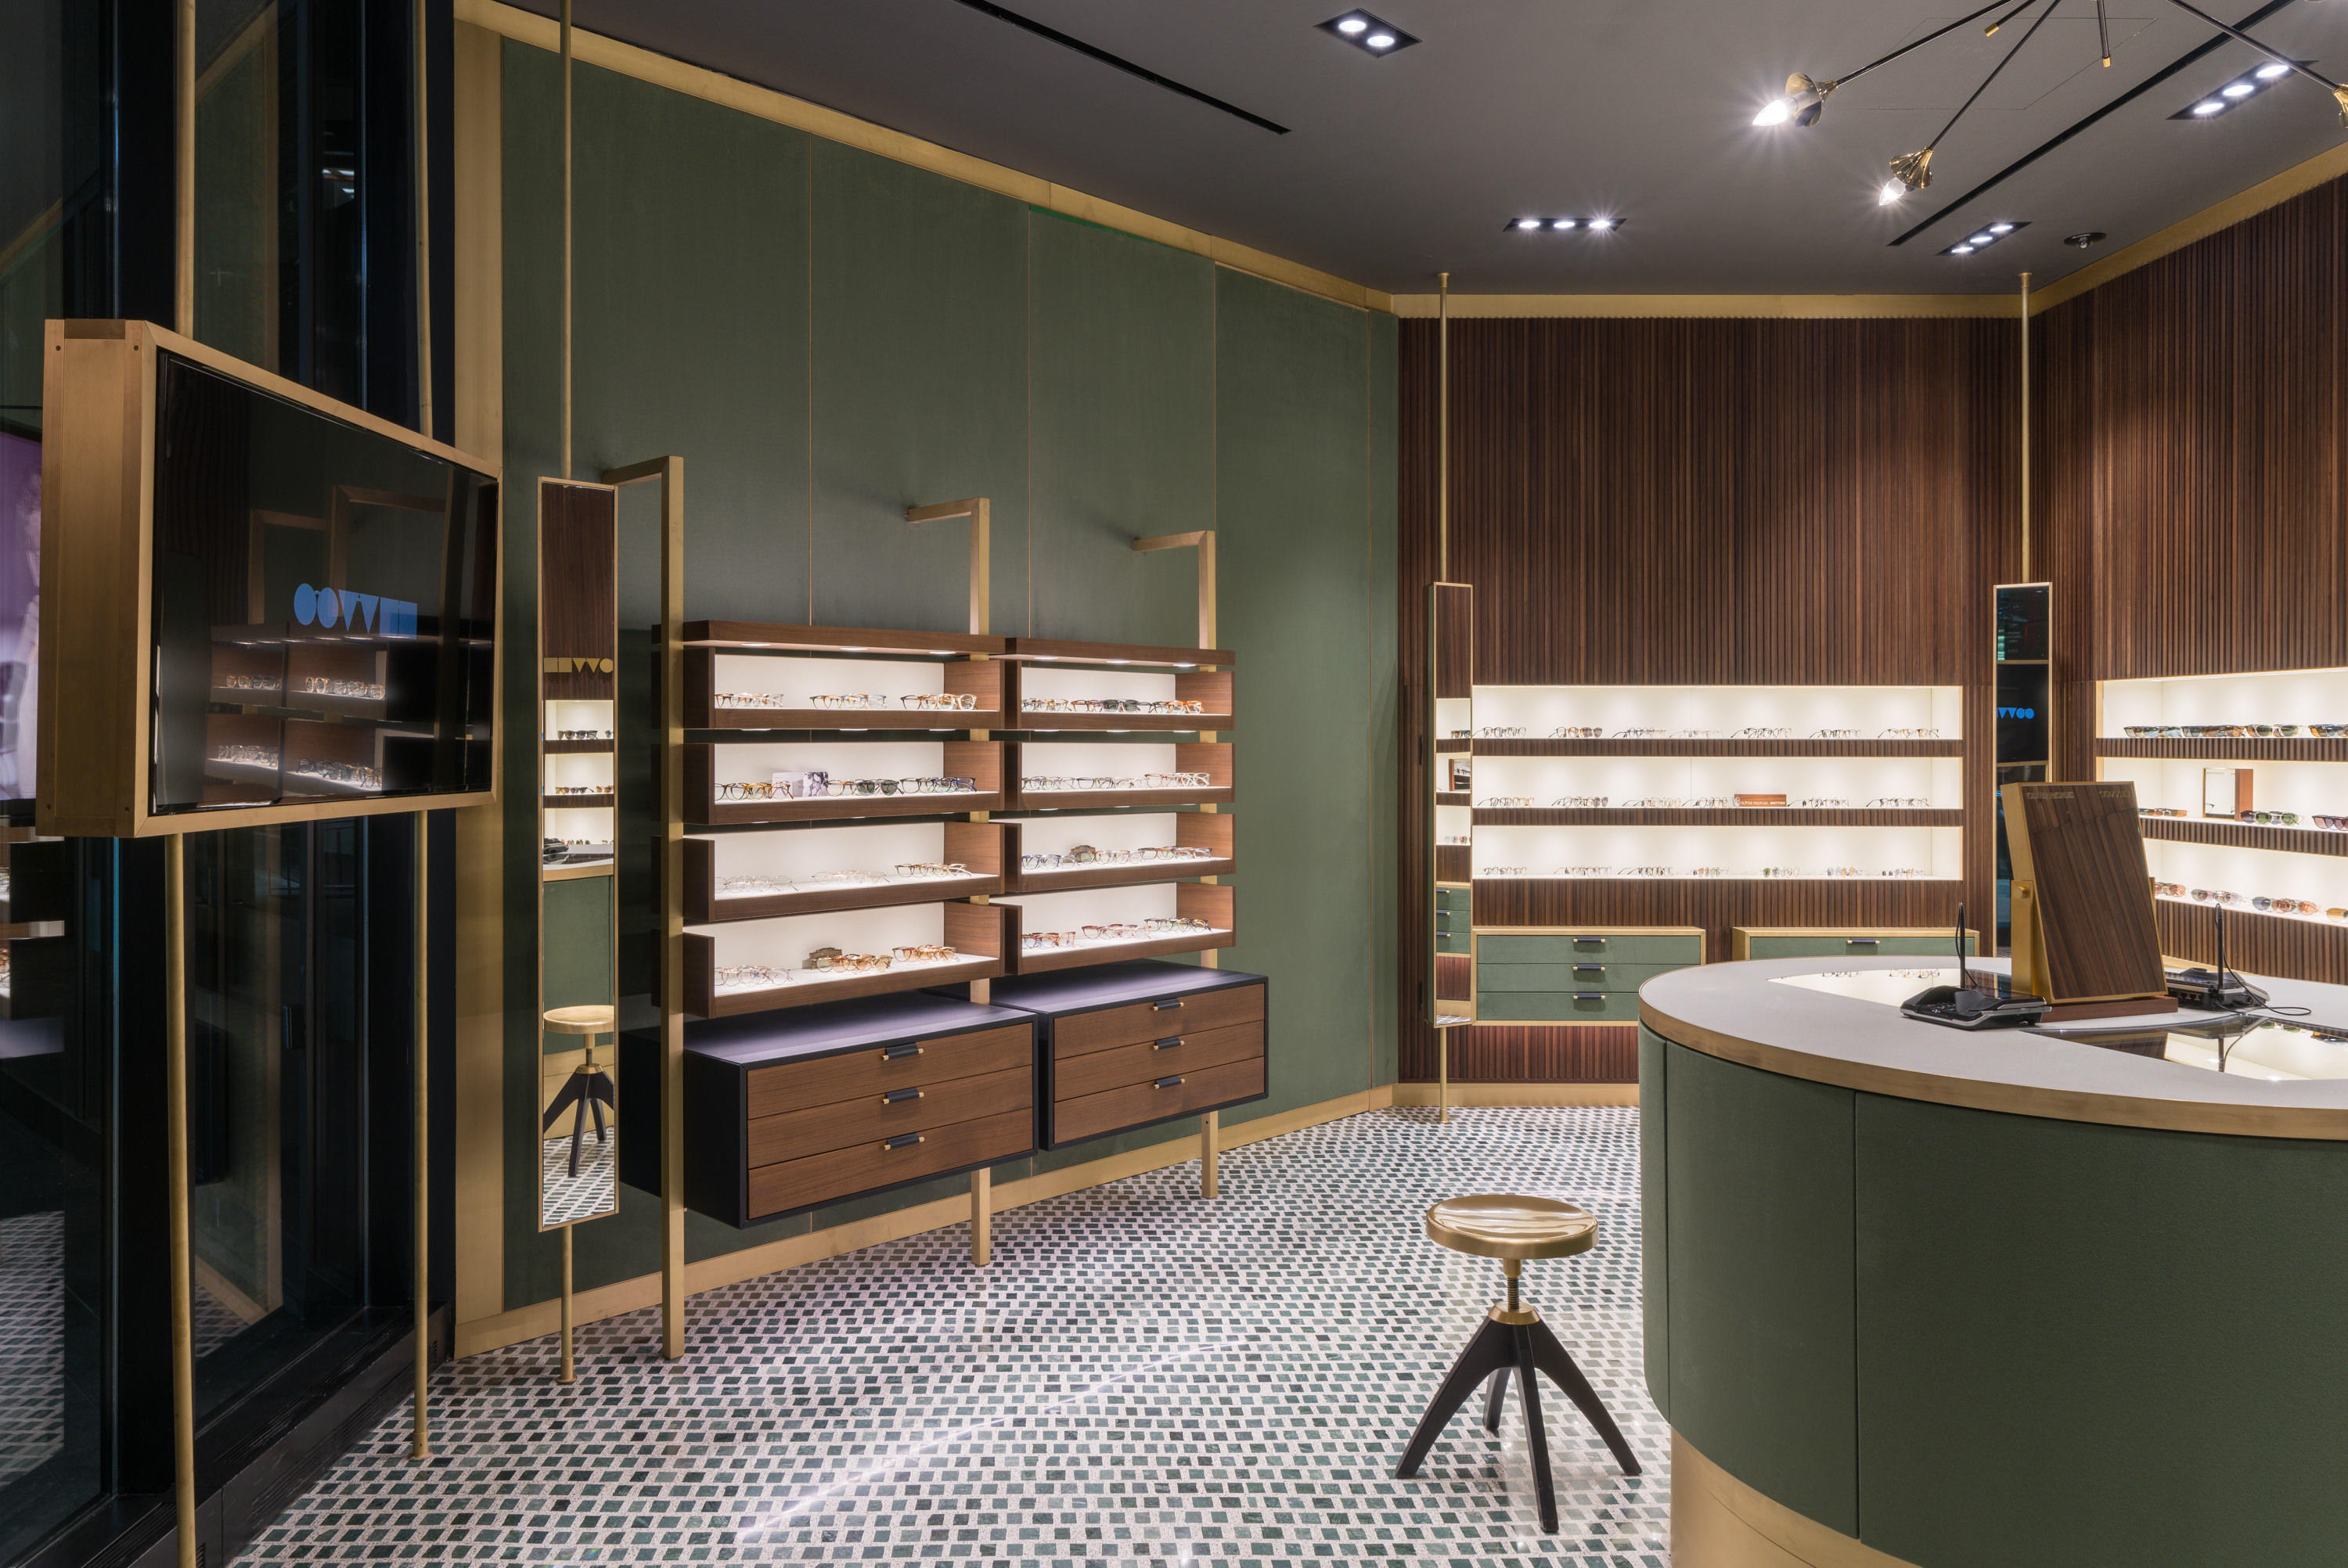 Oliver Peoples Vancouver (236)455-8213